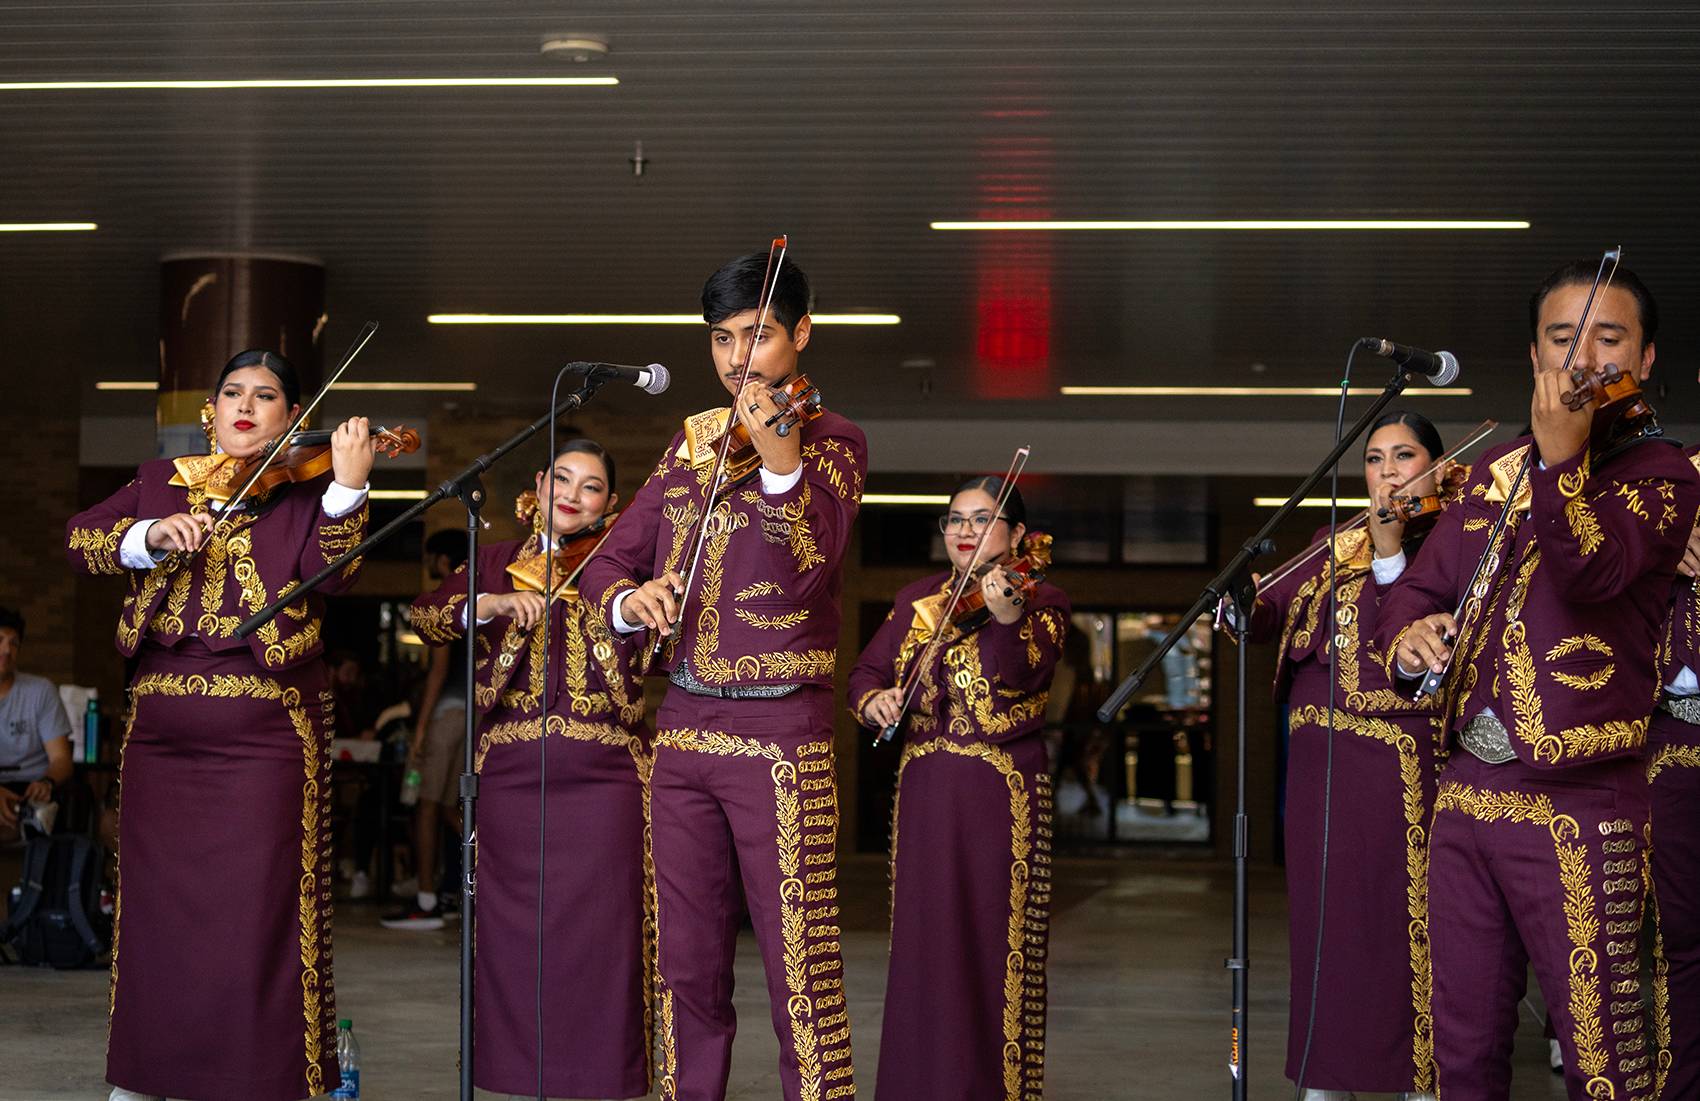 mariachi band during a performance